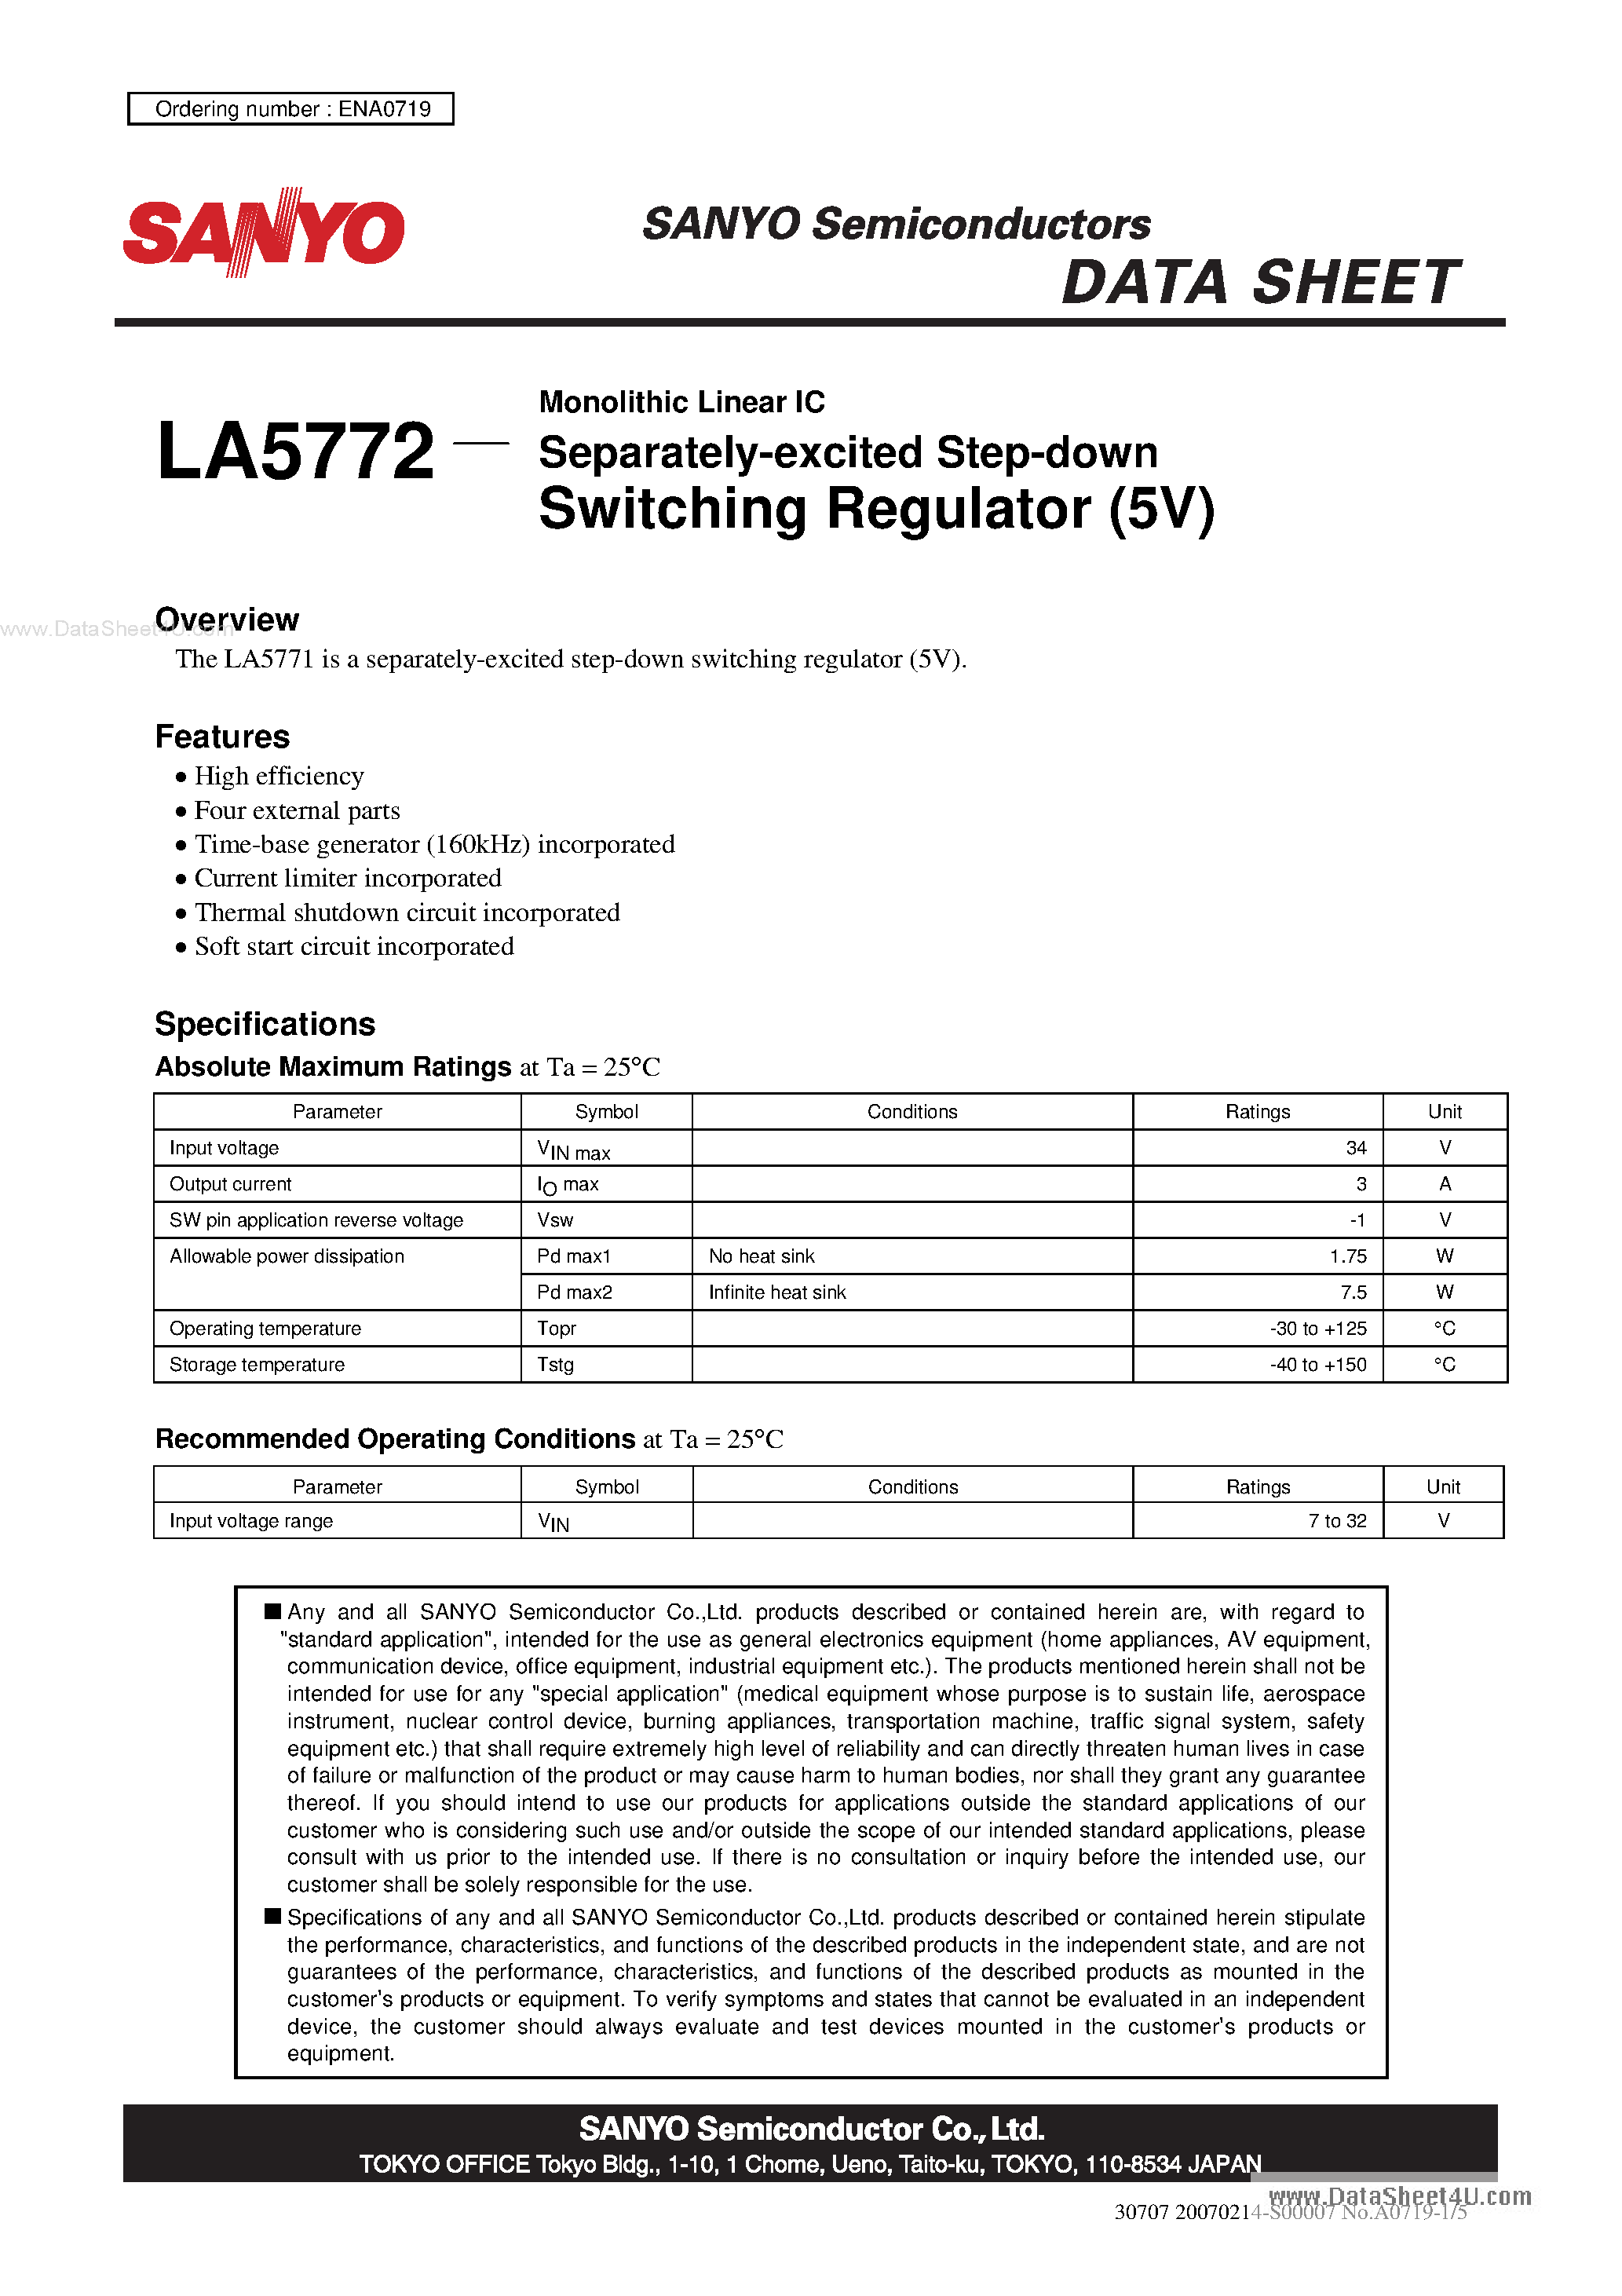 Даташит LA5772-Monolithic Linear IC Separately-Excited Step-Down Switching Regulator страница 1